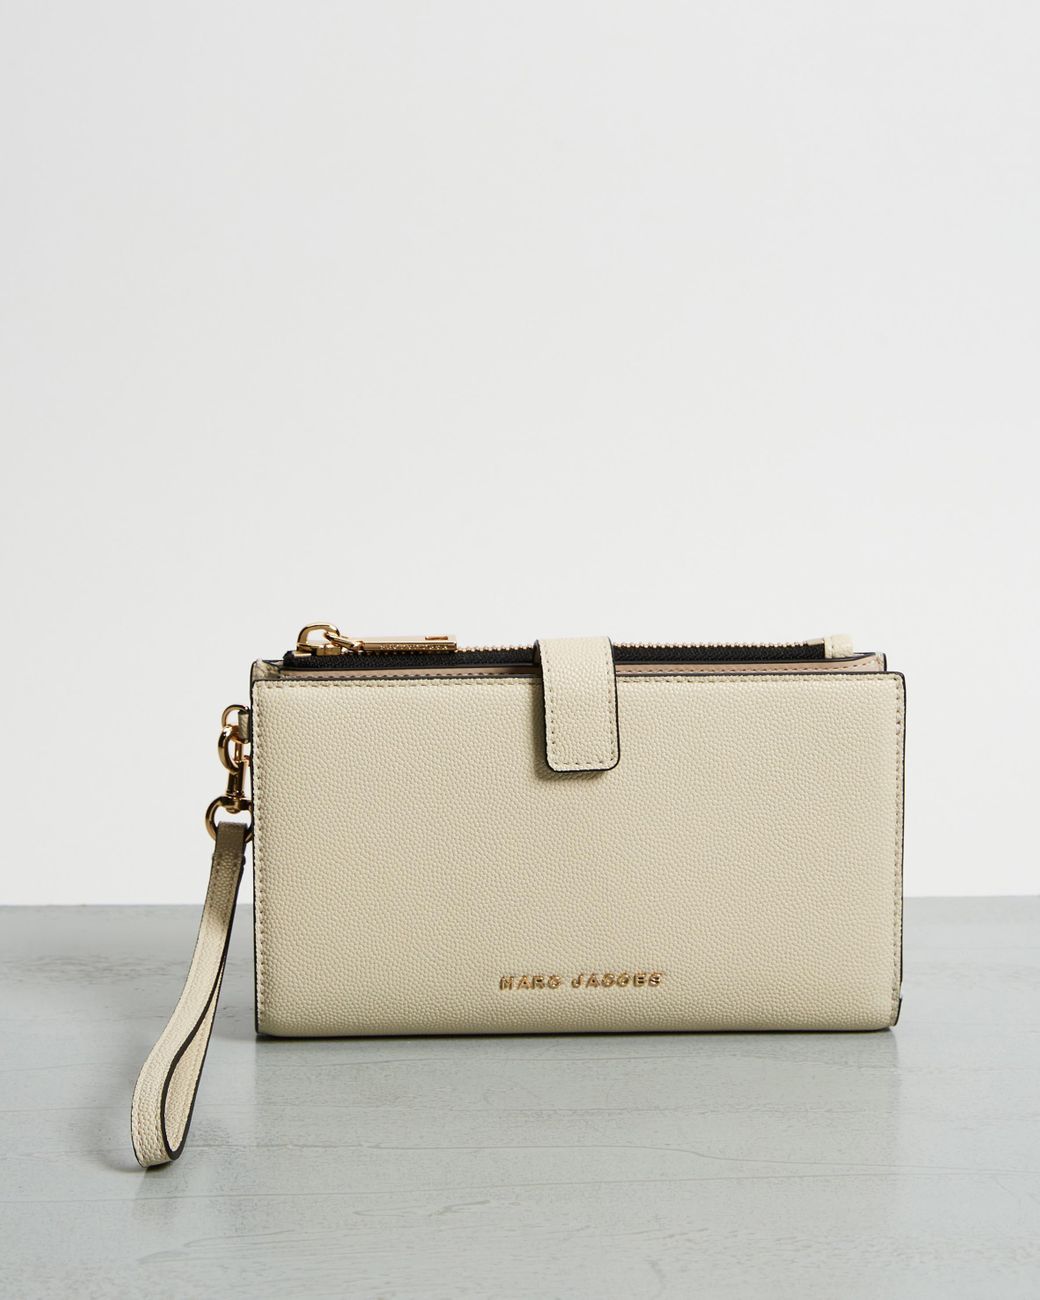 Marc Jacobs Brb Phone Wristlet in Natural | Lyst Australia